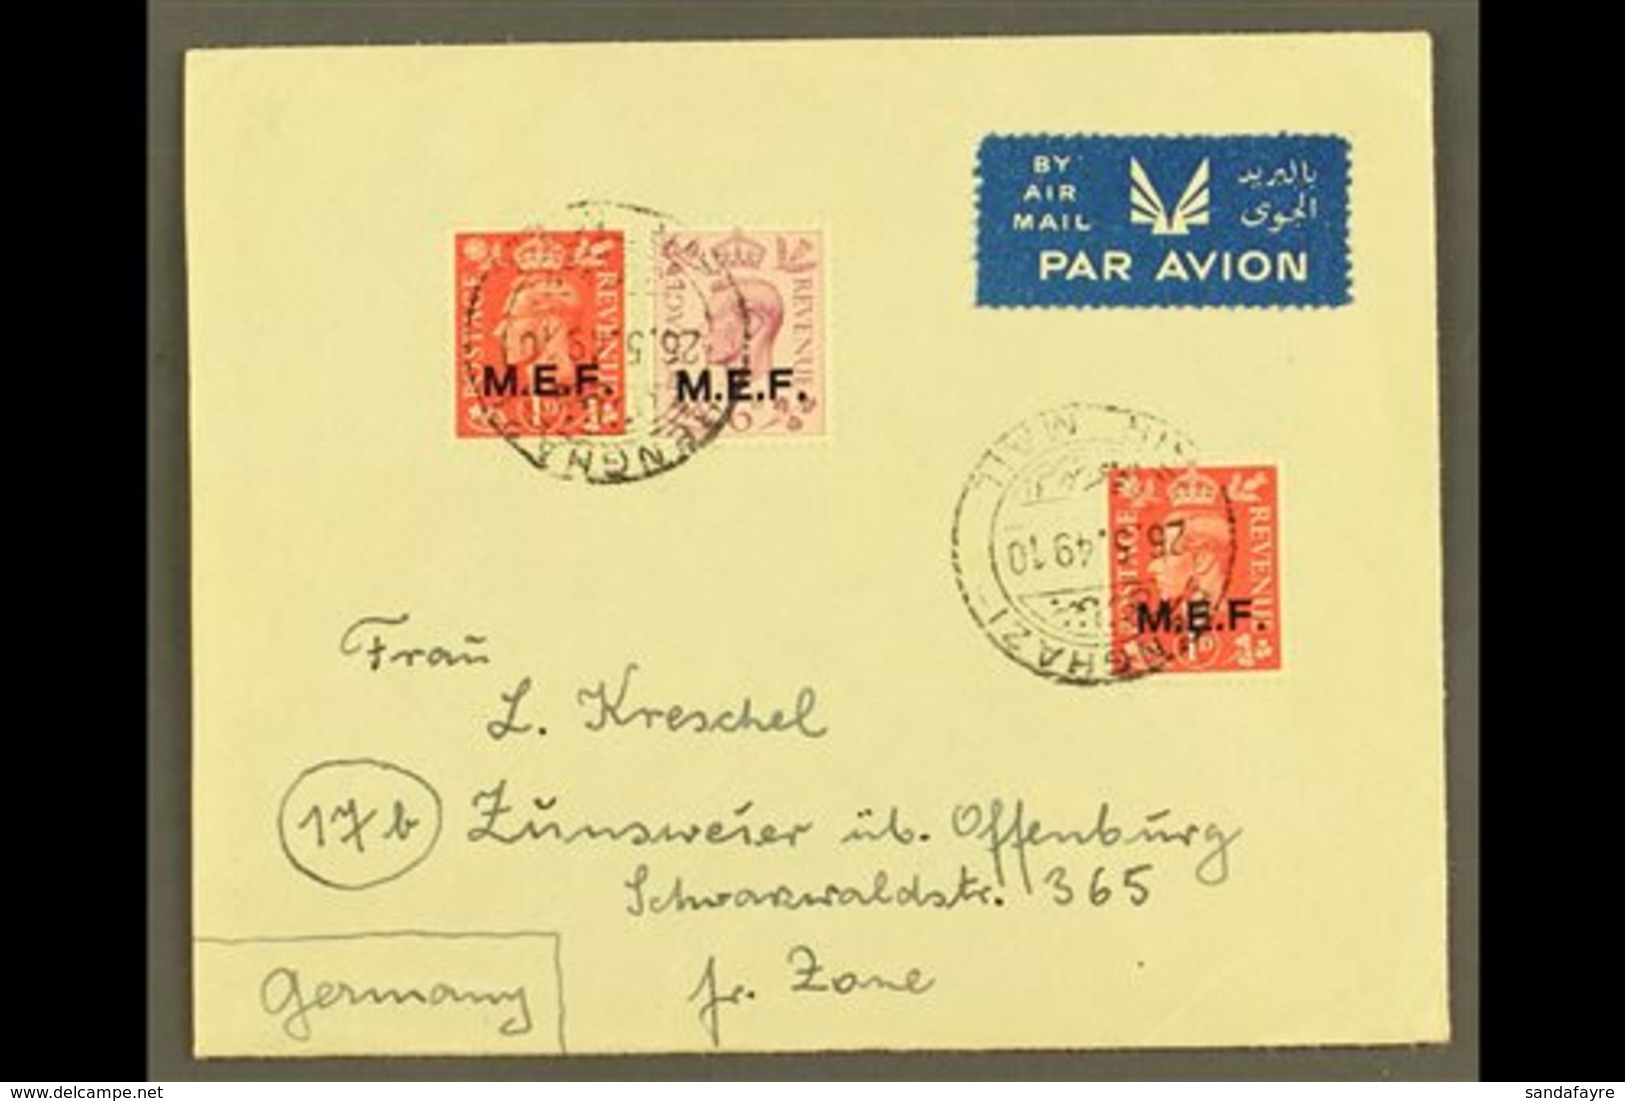 CYRENAICA 1949 Airmailed Cover To French Zone, Germany, Franked KGVI 1d X2 & 6d "M.E.F." Ovpts, SG M11, M16, Benghazi 26 - Africa Orientale Italiana